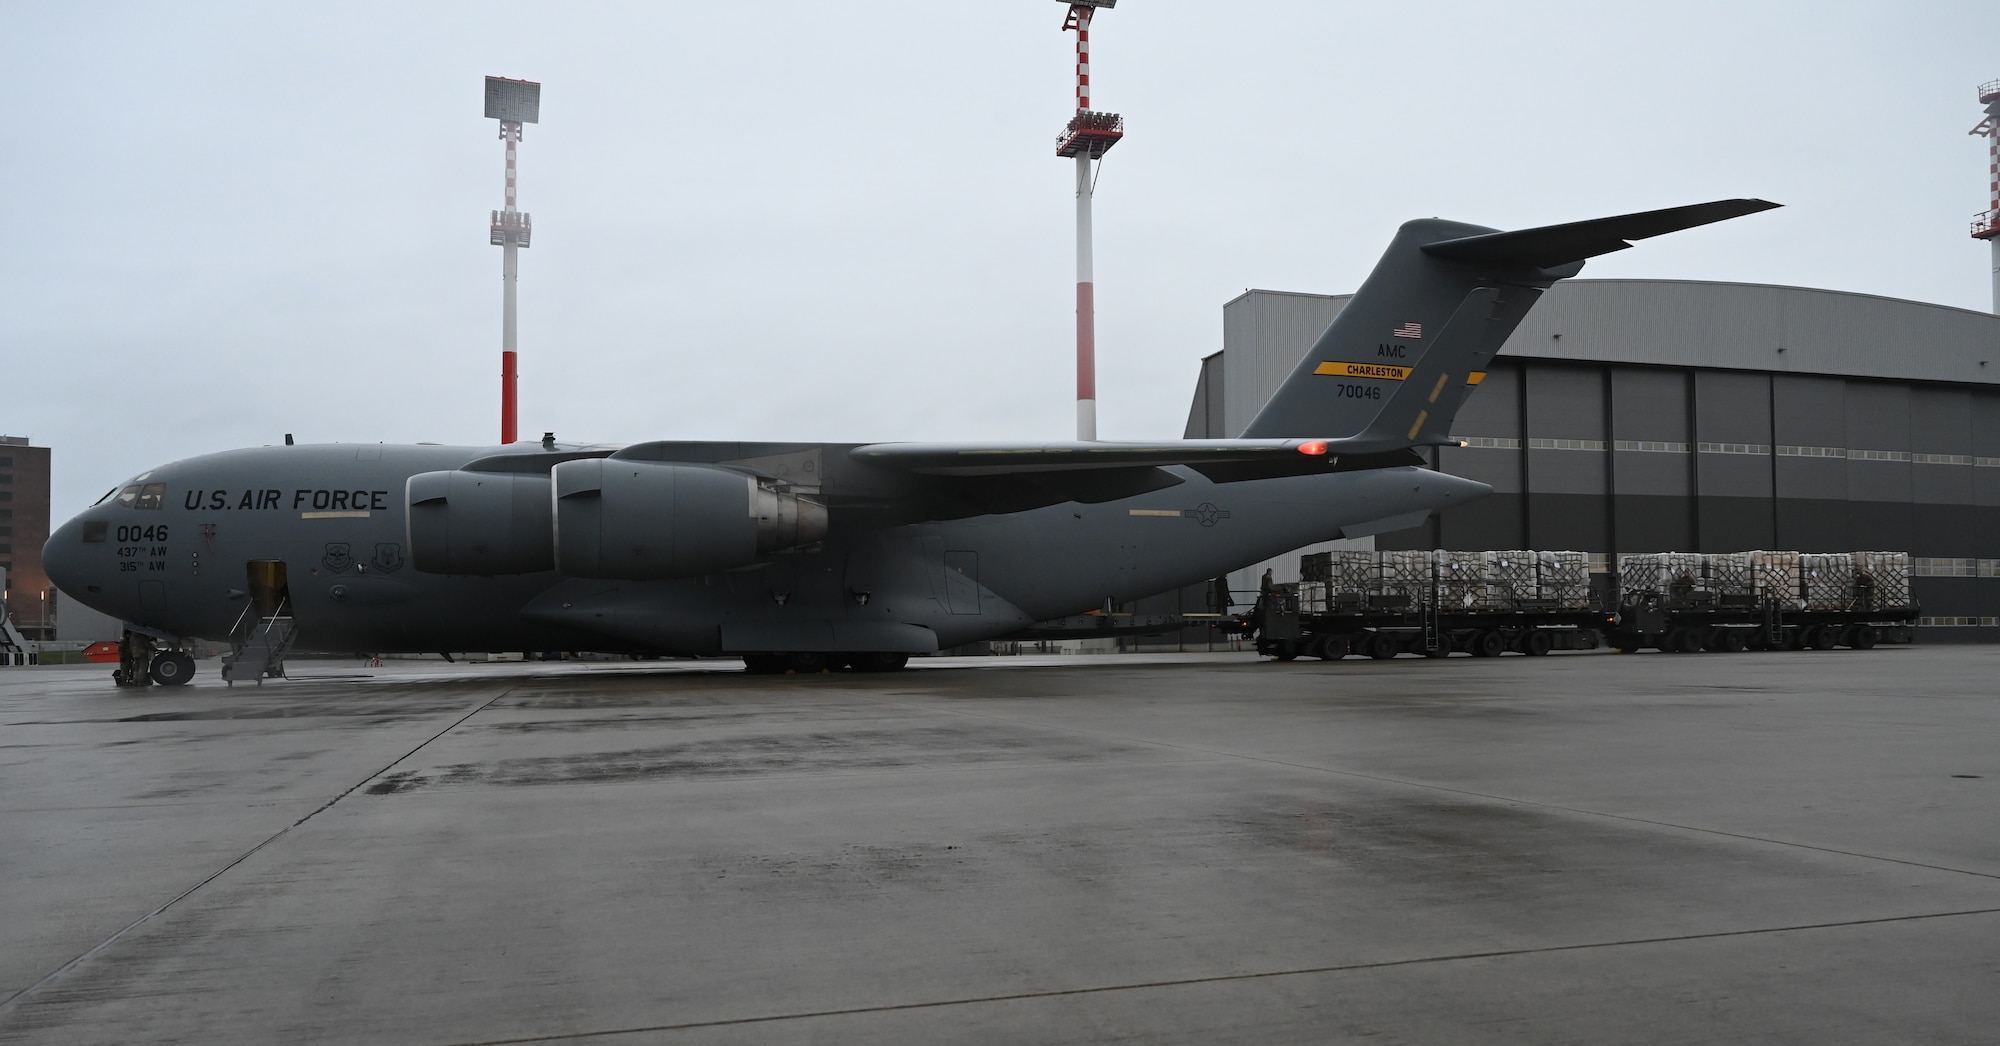 A C-17 Globemaster III is unloaded at Ramstein Air Base, Germany, Feb. 2, 2021. More than 400,000 masks requested by the Defense Logistics Agency were delivered to Ramstein and unloaded by the 721st Aerial Port Squadron. The 721st APS plays an important role in the distribution of masks and other COVID-19 protective equipment.(U.S. Air Force photo by Senior Airman Thomas Karol)